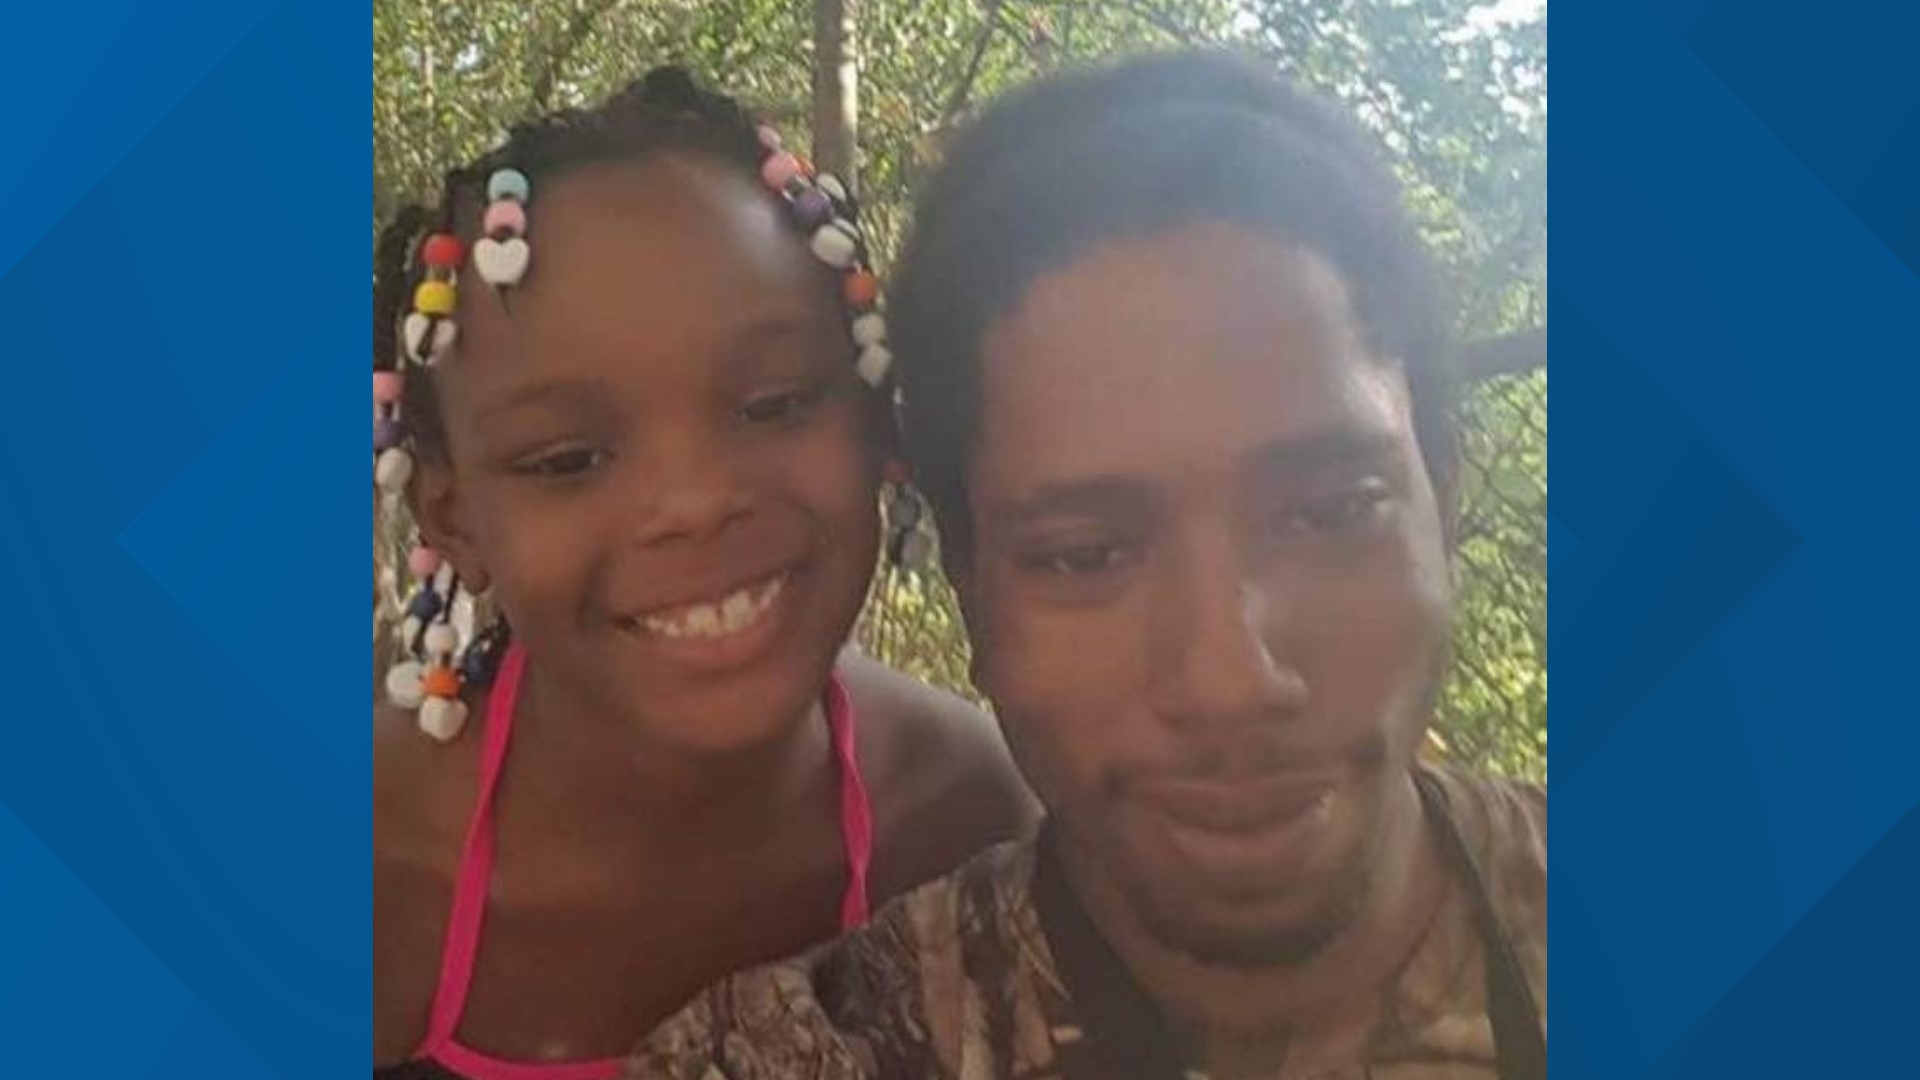 On June 20, 2017, 28-year-old Alkevin Glenn Mire and his 7-year-old daughter were found shot inside a home. Mire later died at the hospital.